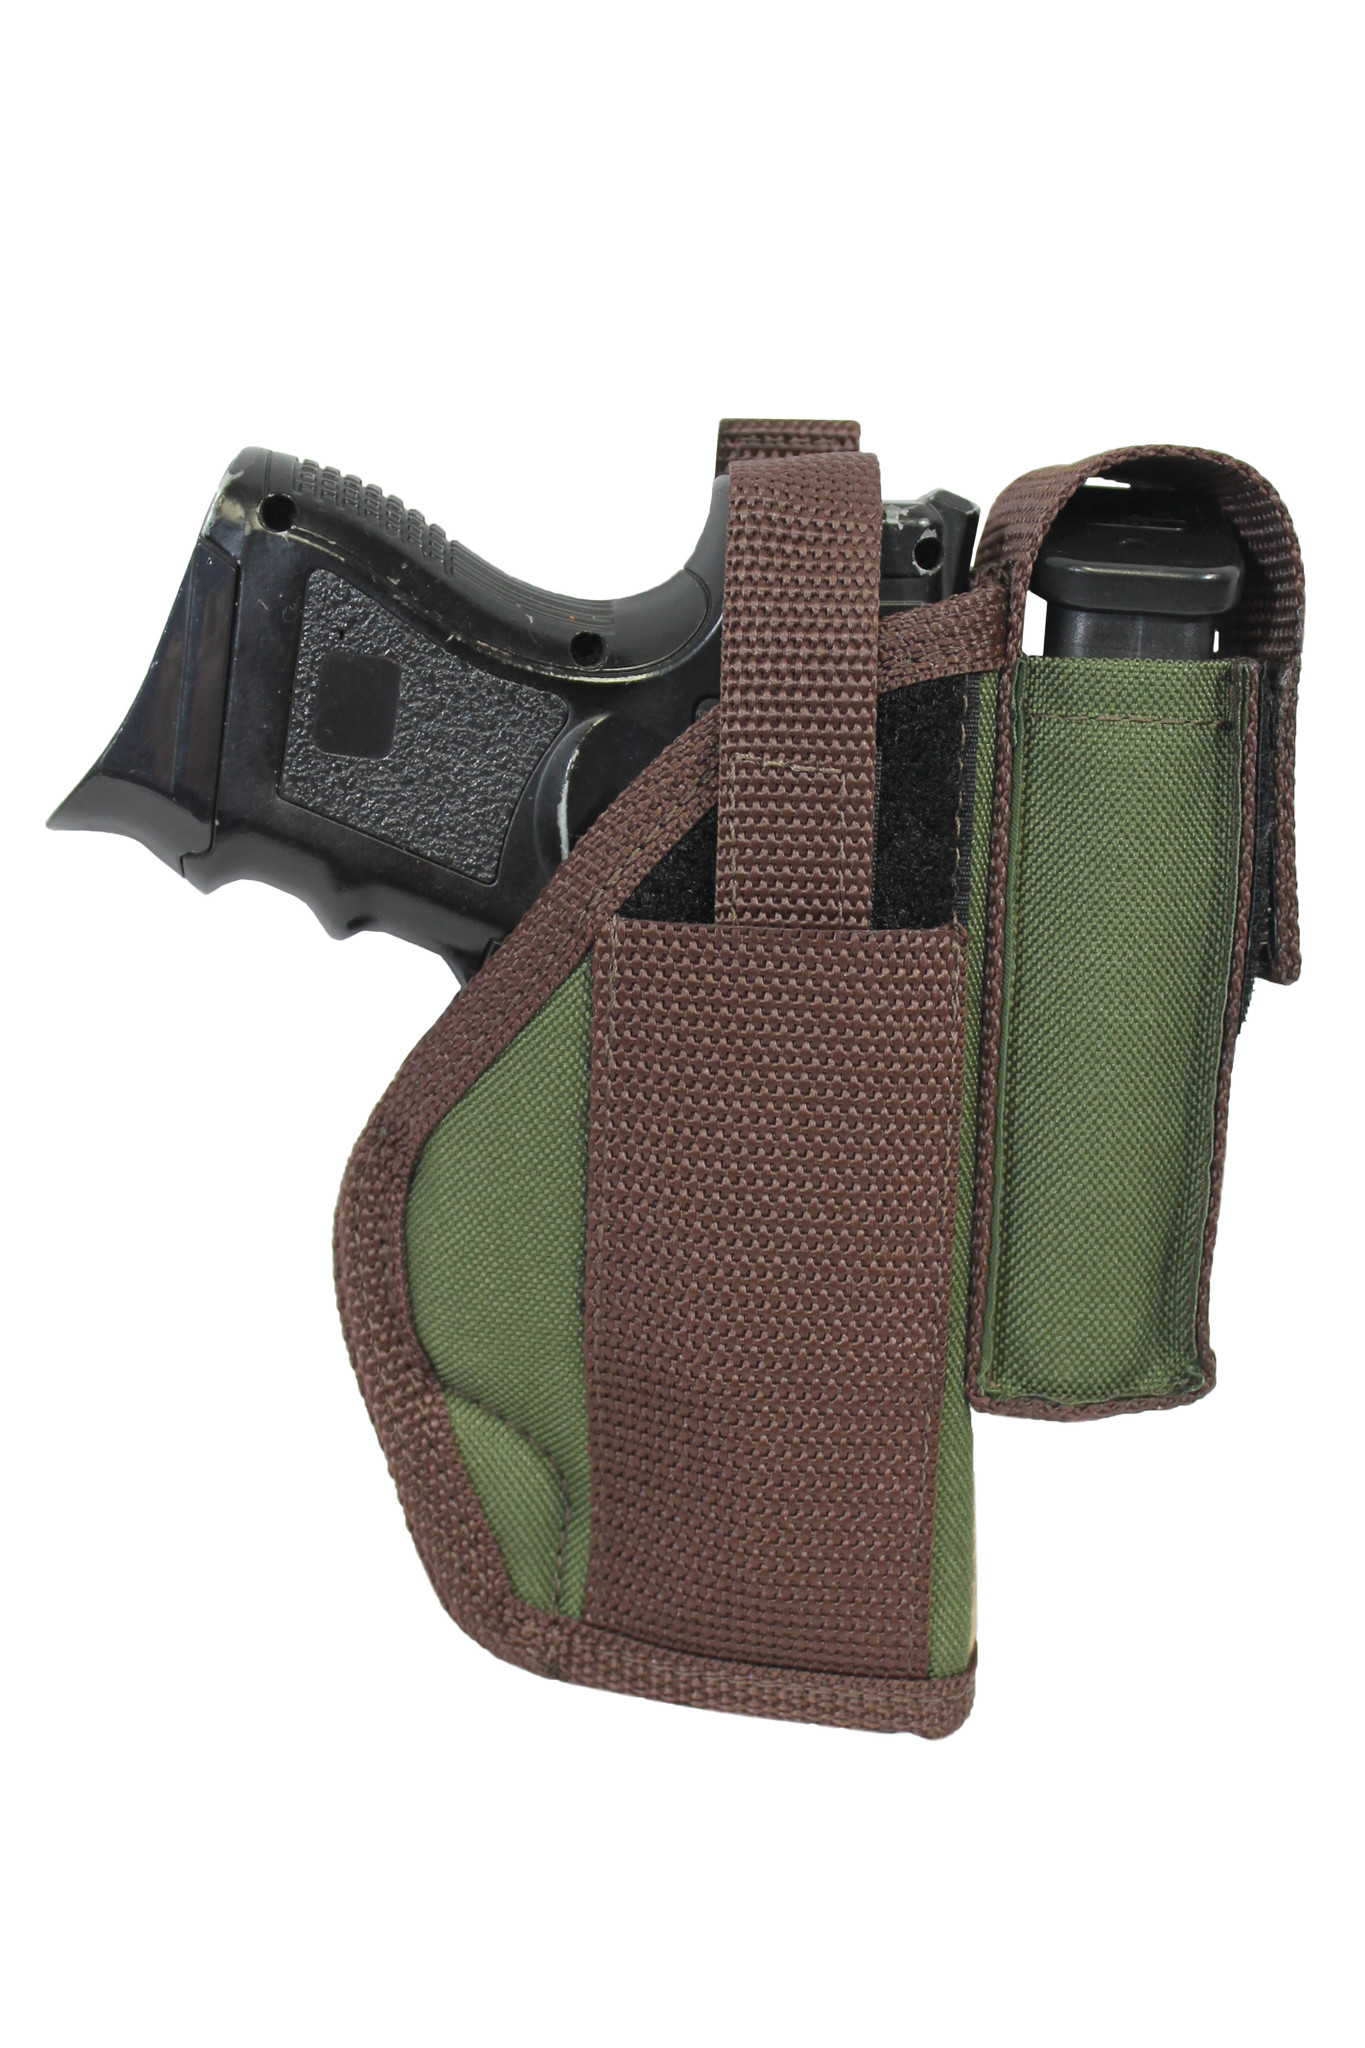 Tactical MOLLE Gun Holster Holder with Magazine Pouch for Beretta  92FS/Taurus G3